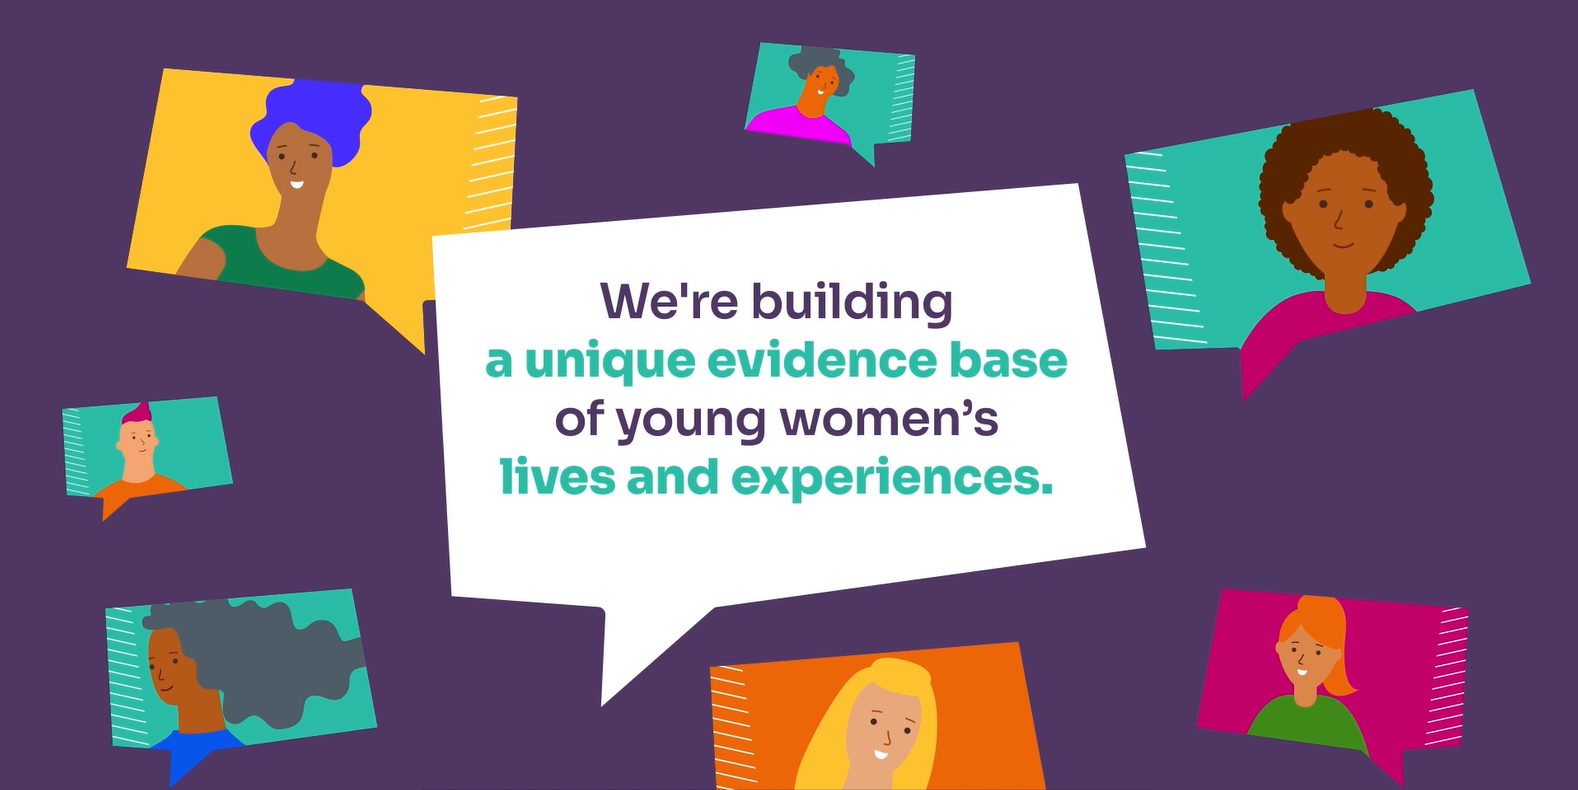 The image is an illustration of women's faces. In the middle is a speech bubble that says: we're building a unique evidence base of young women's lives and experiences.